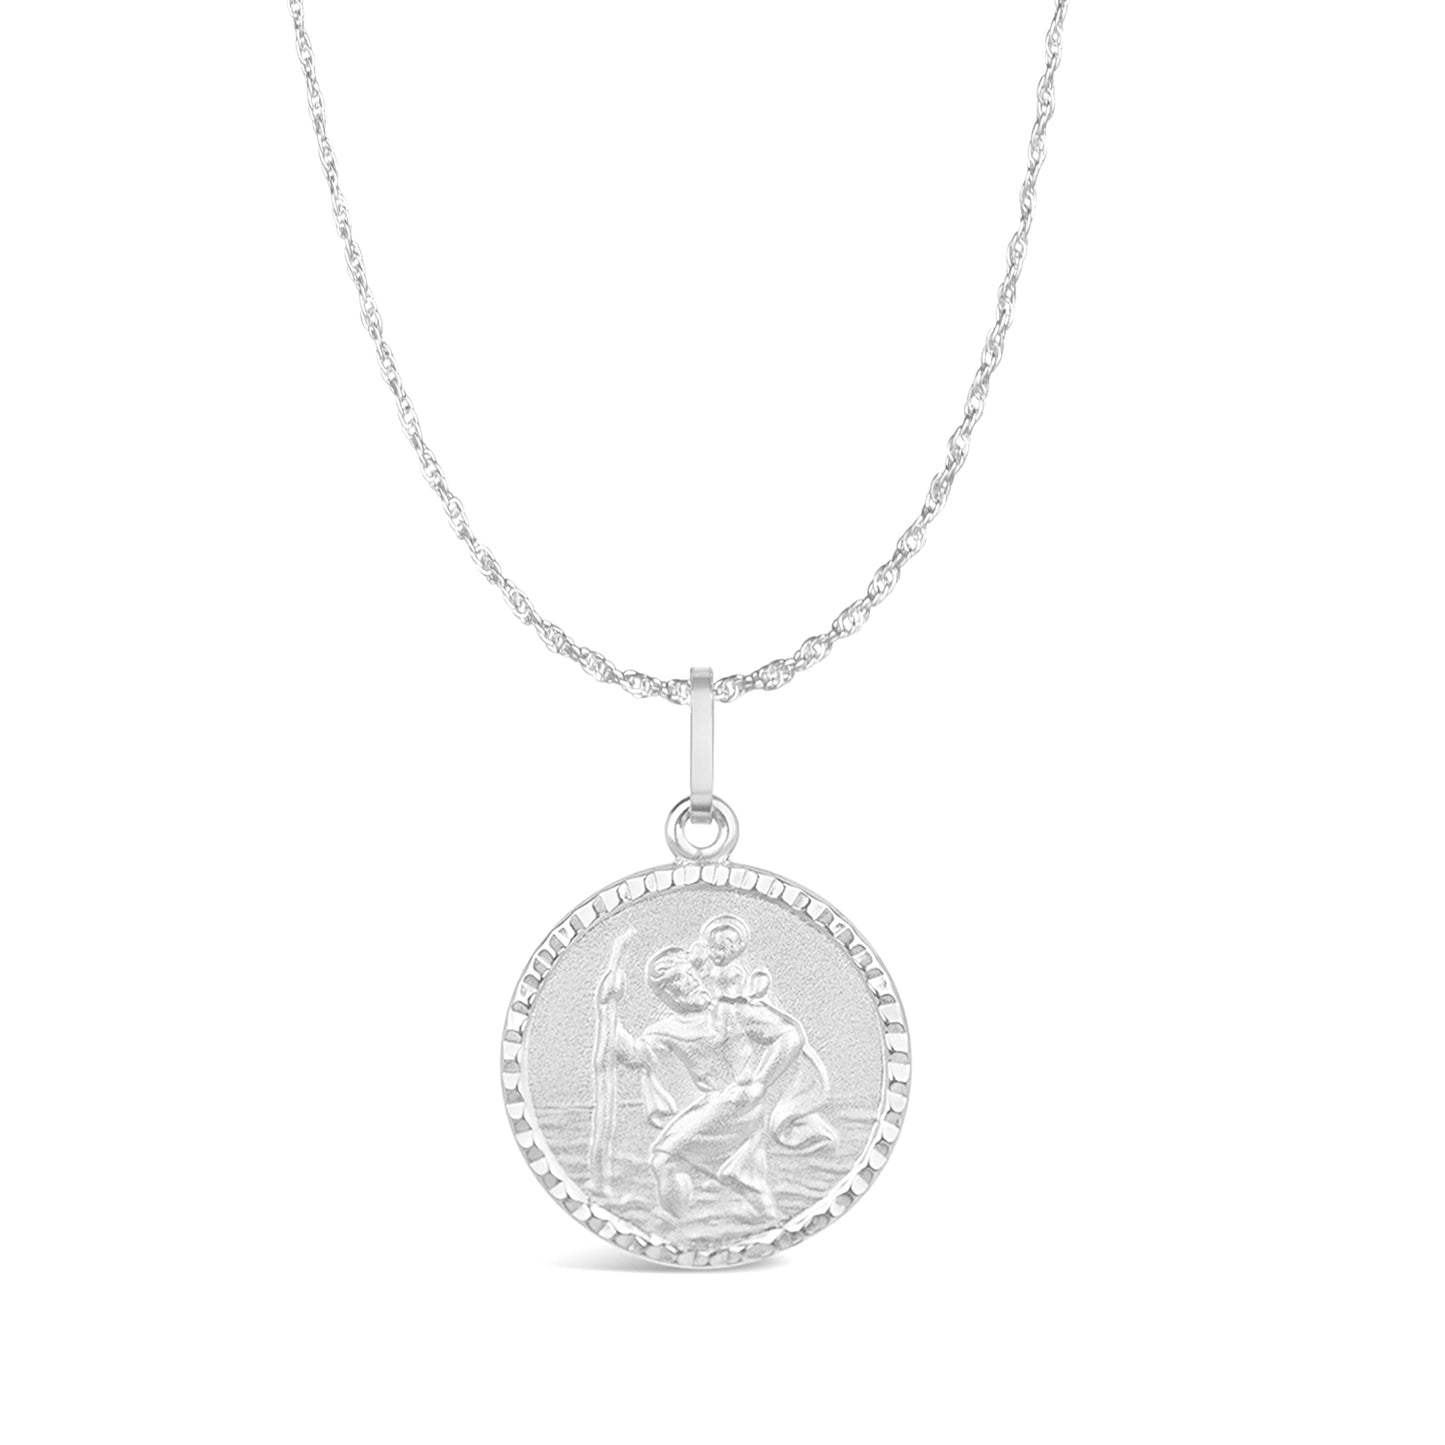 Men's St Christopher Necklace Solid Silver + Engraving